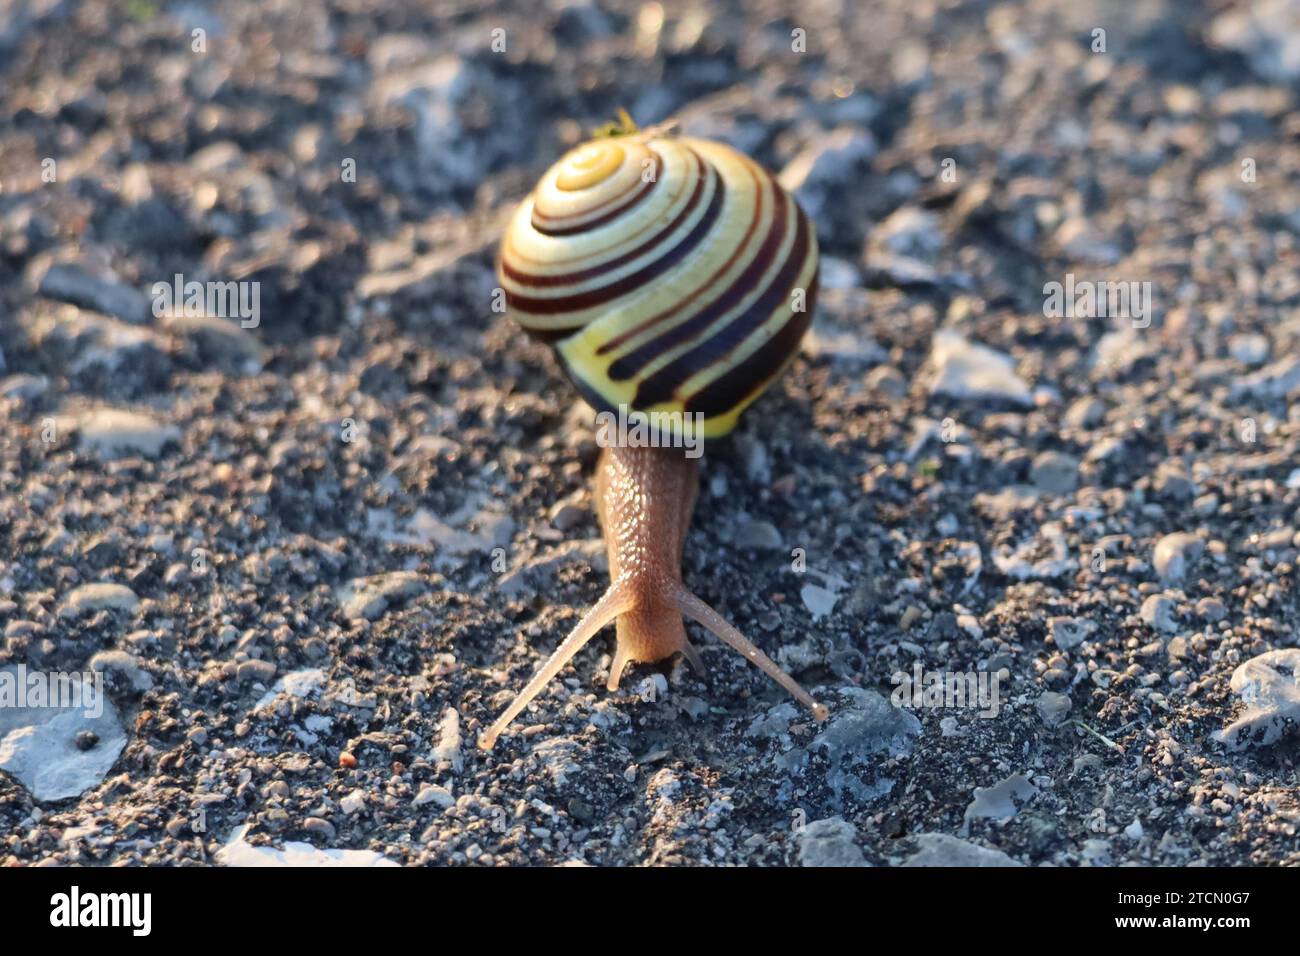 A macro shot of a small snail with a striped shell on a gravel surface Stock Photo